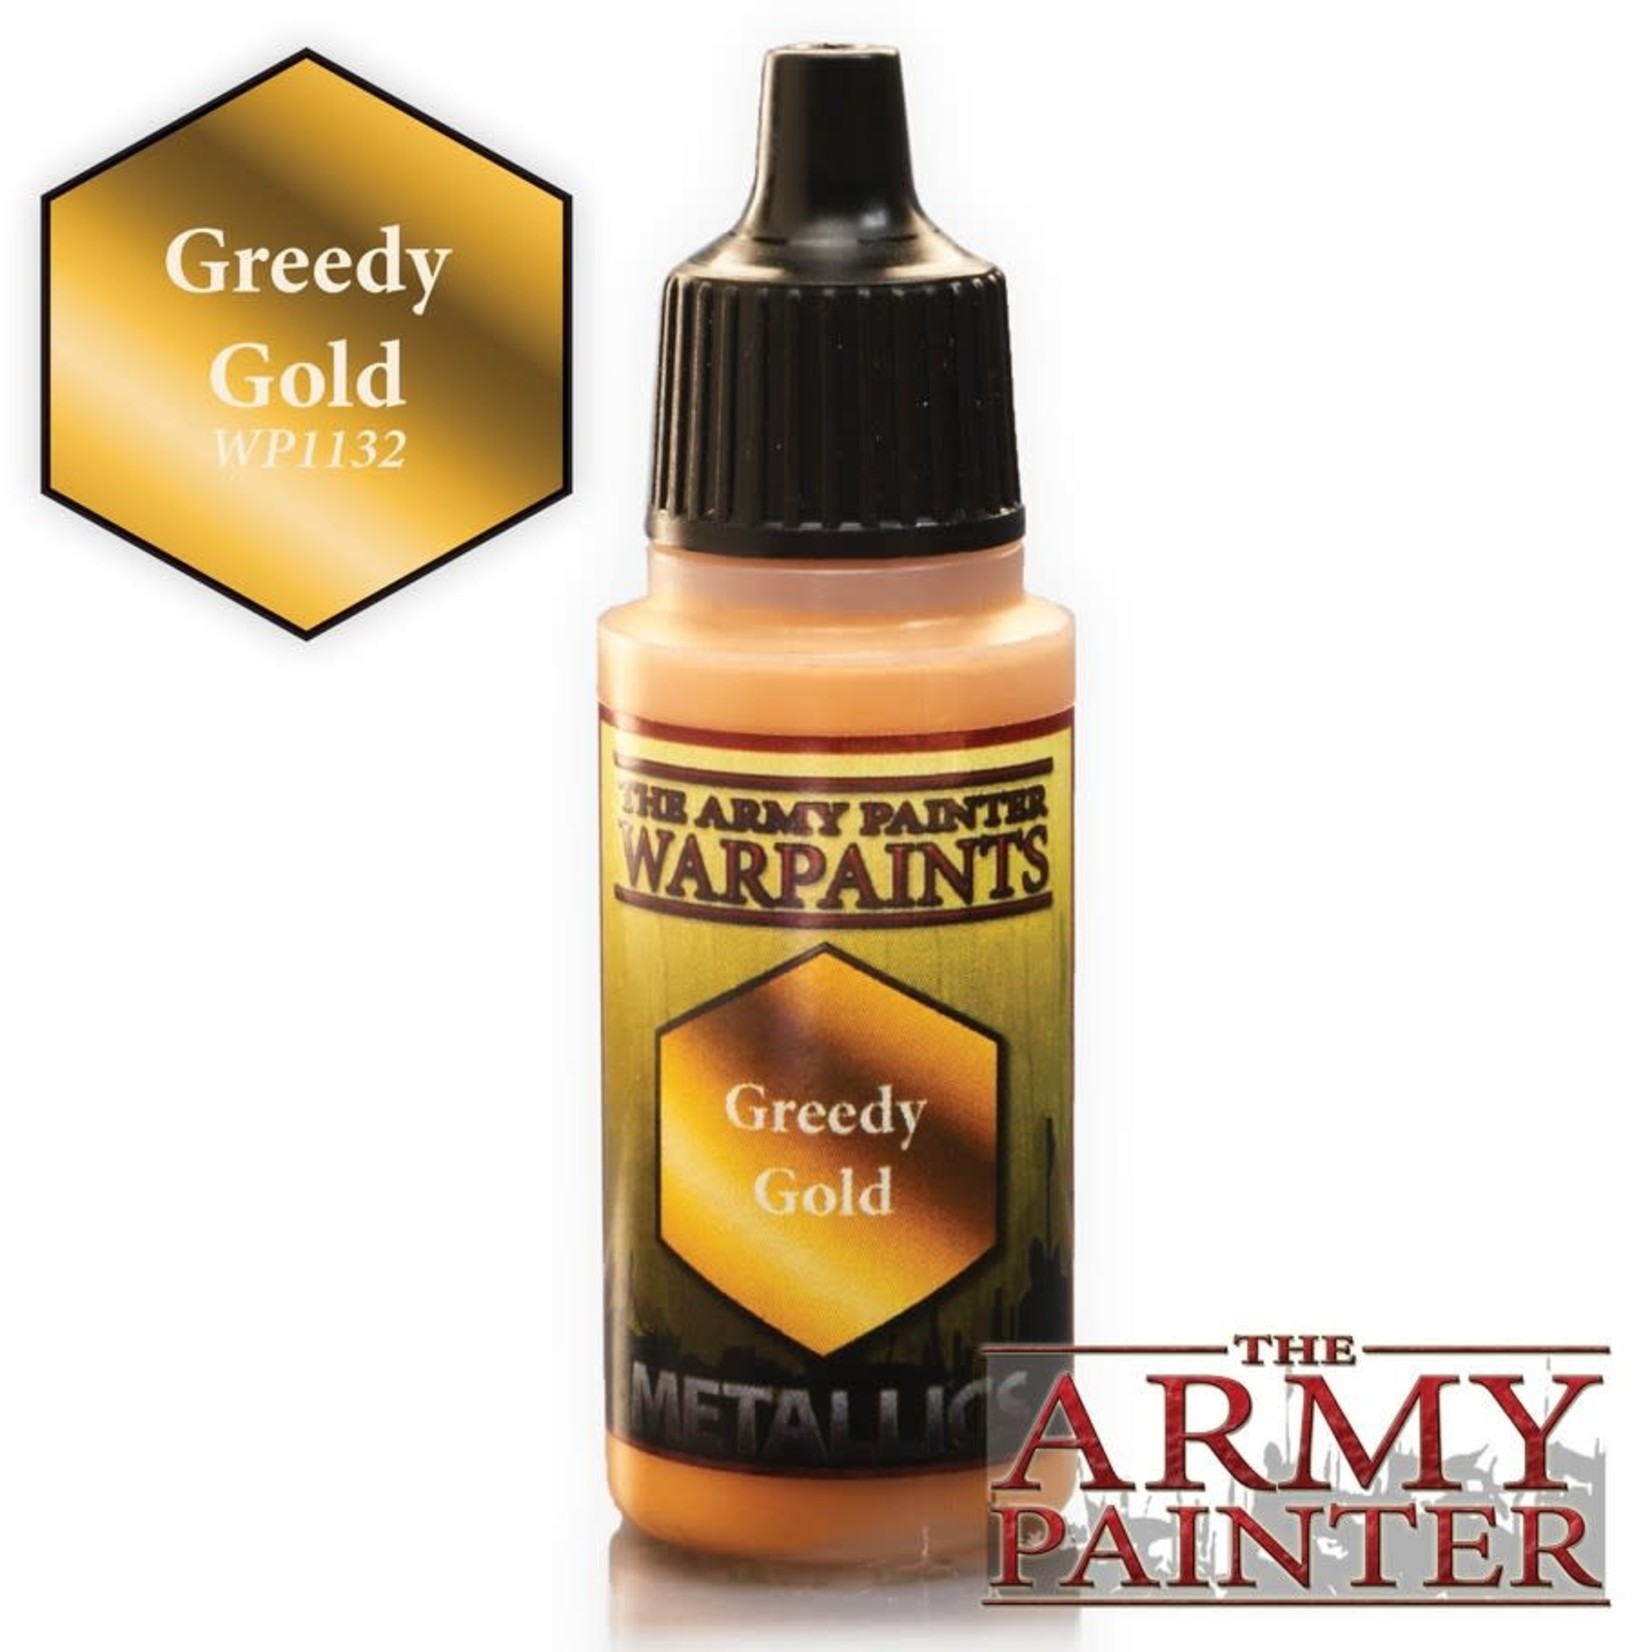 The Army Painter Warpaints: Metallics: Greedy Gold